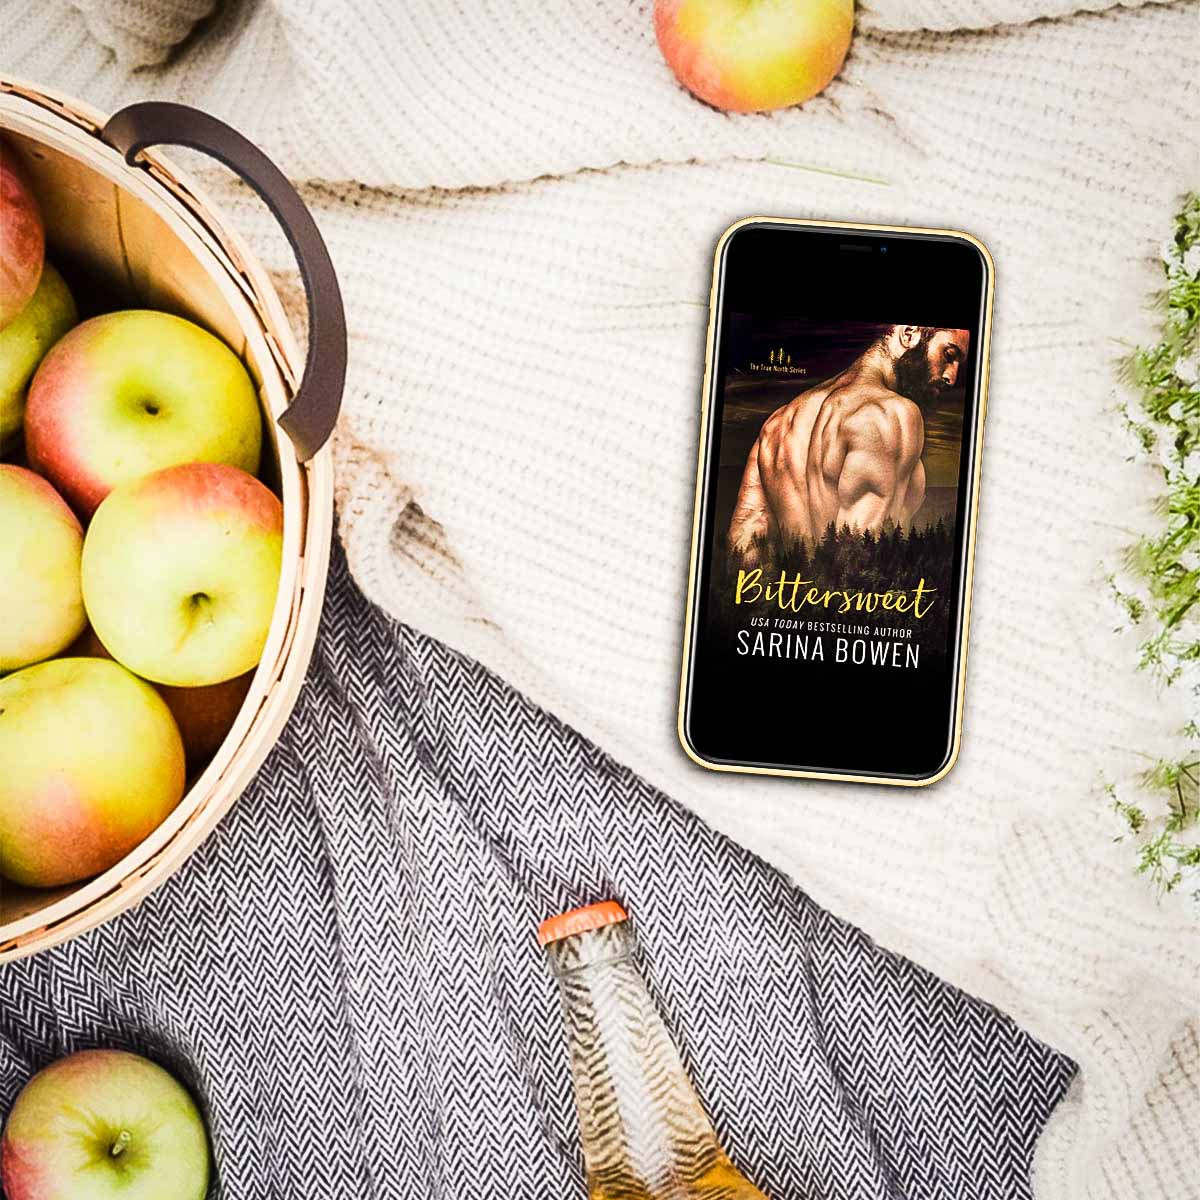 Bittersweet by Sarina Bowen, the first book in the True North series, is a second chance romance between a grumpy farmer and a plucky chef that will have you falling in love with Vermont!